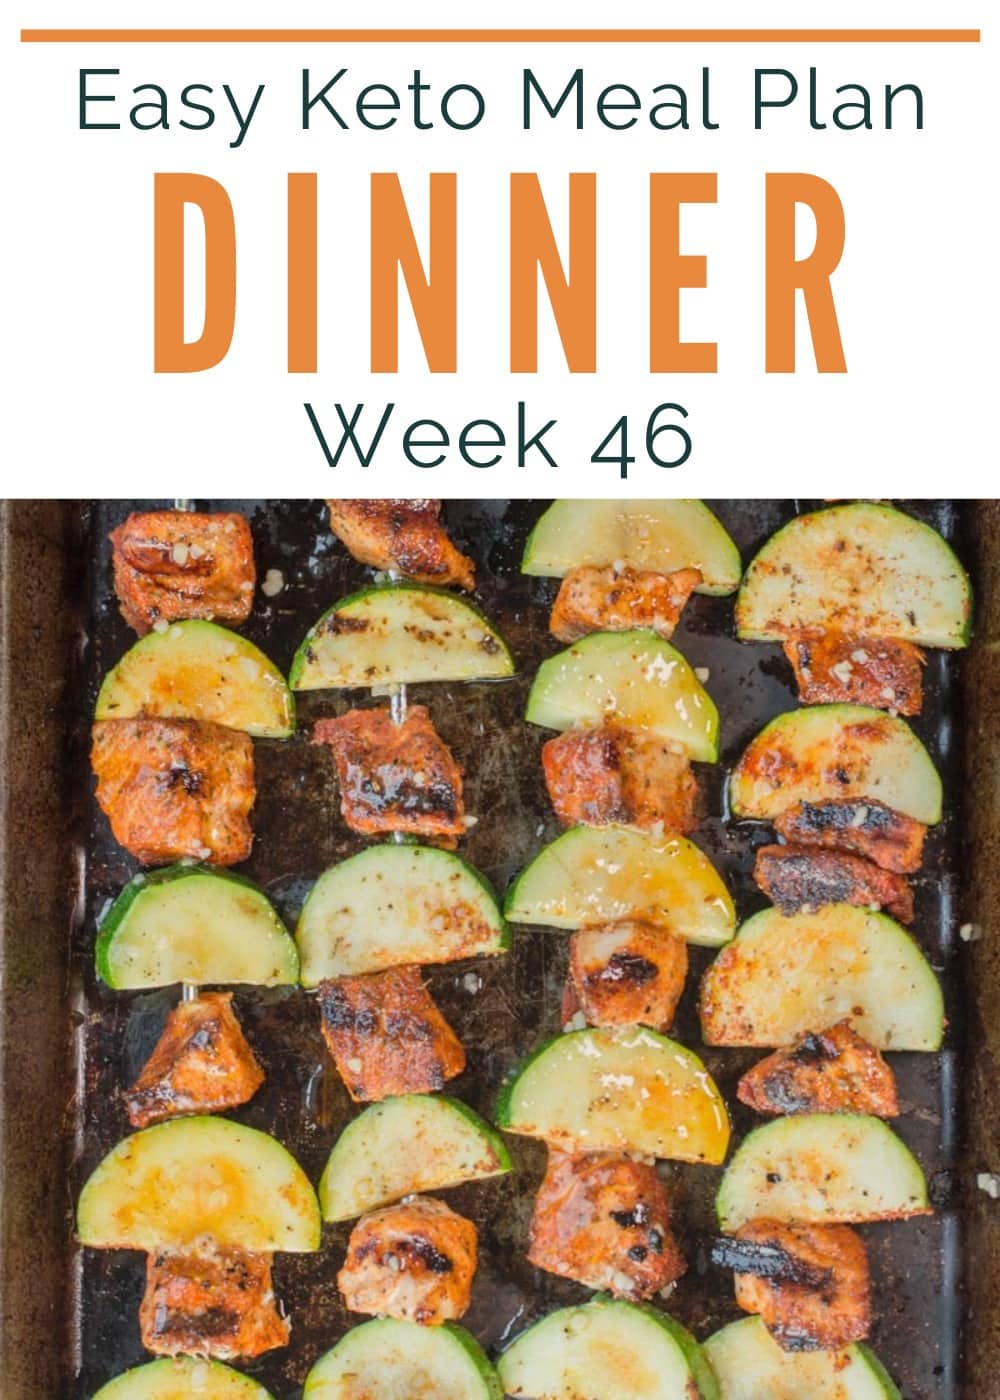 Keto is EASY with this Easy Keto Meal Plan! Get five simple low carb dinners plus a keto dessert recipe, printable shopping list, meal prep tips, and keto side suggestions!